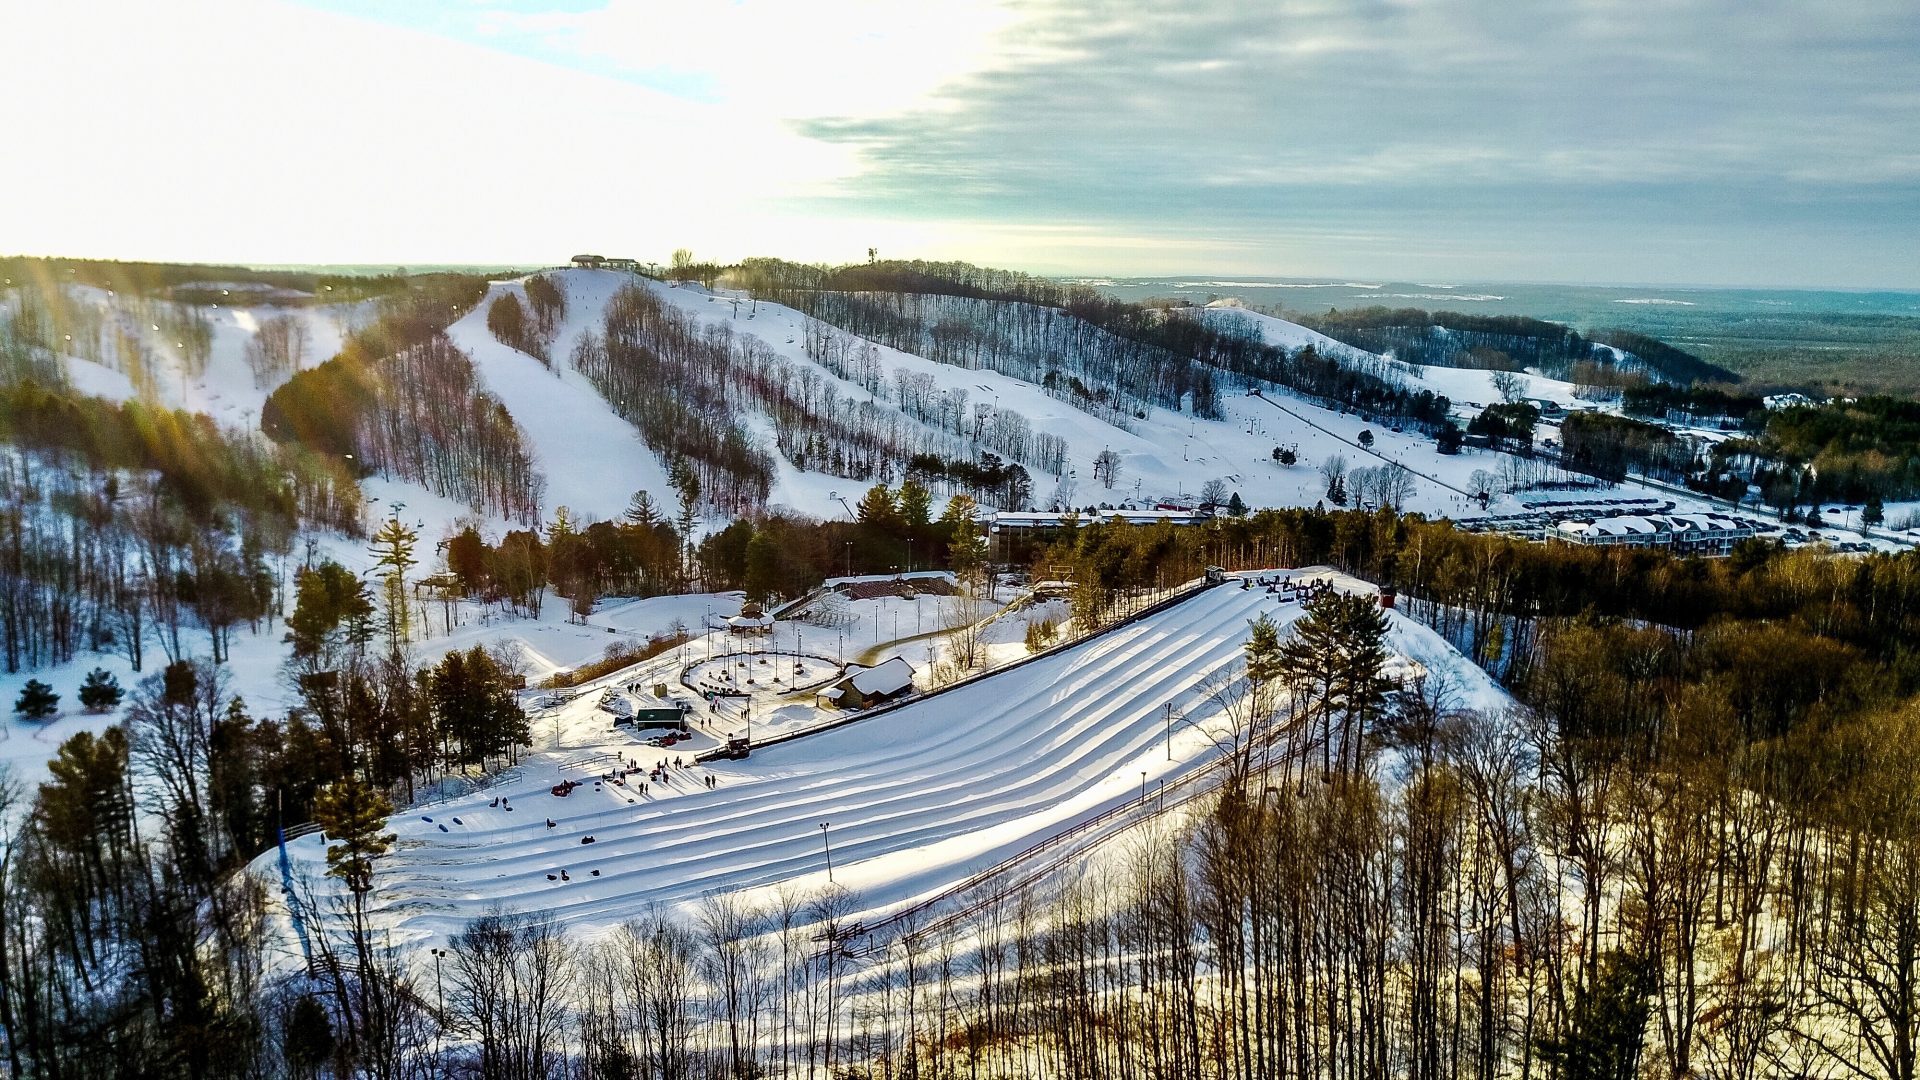 Why you should visit Horseshoe Resort this winter